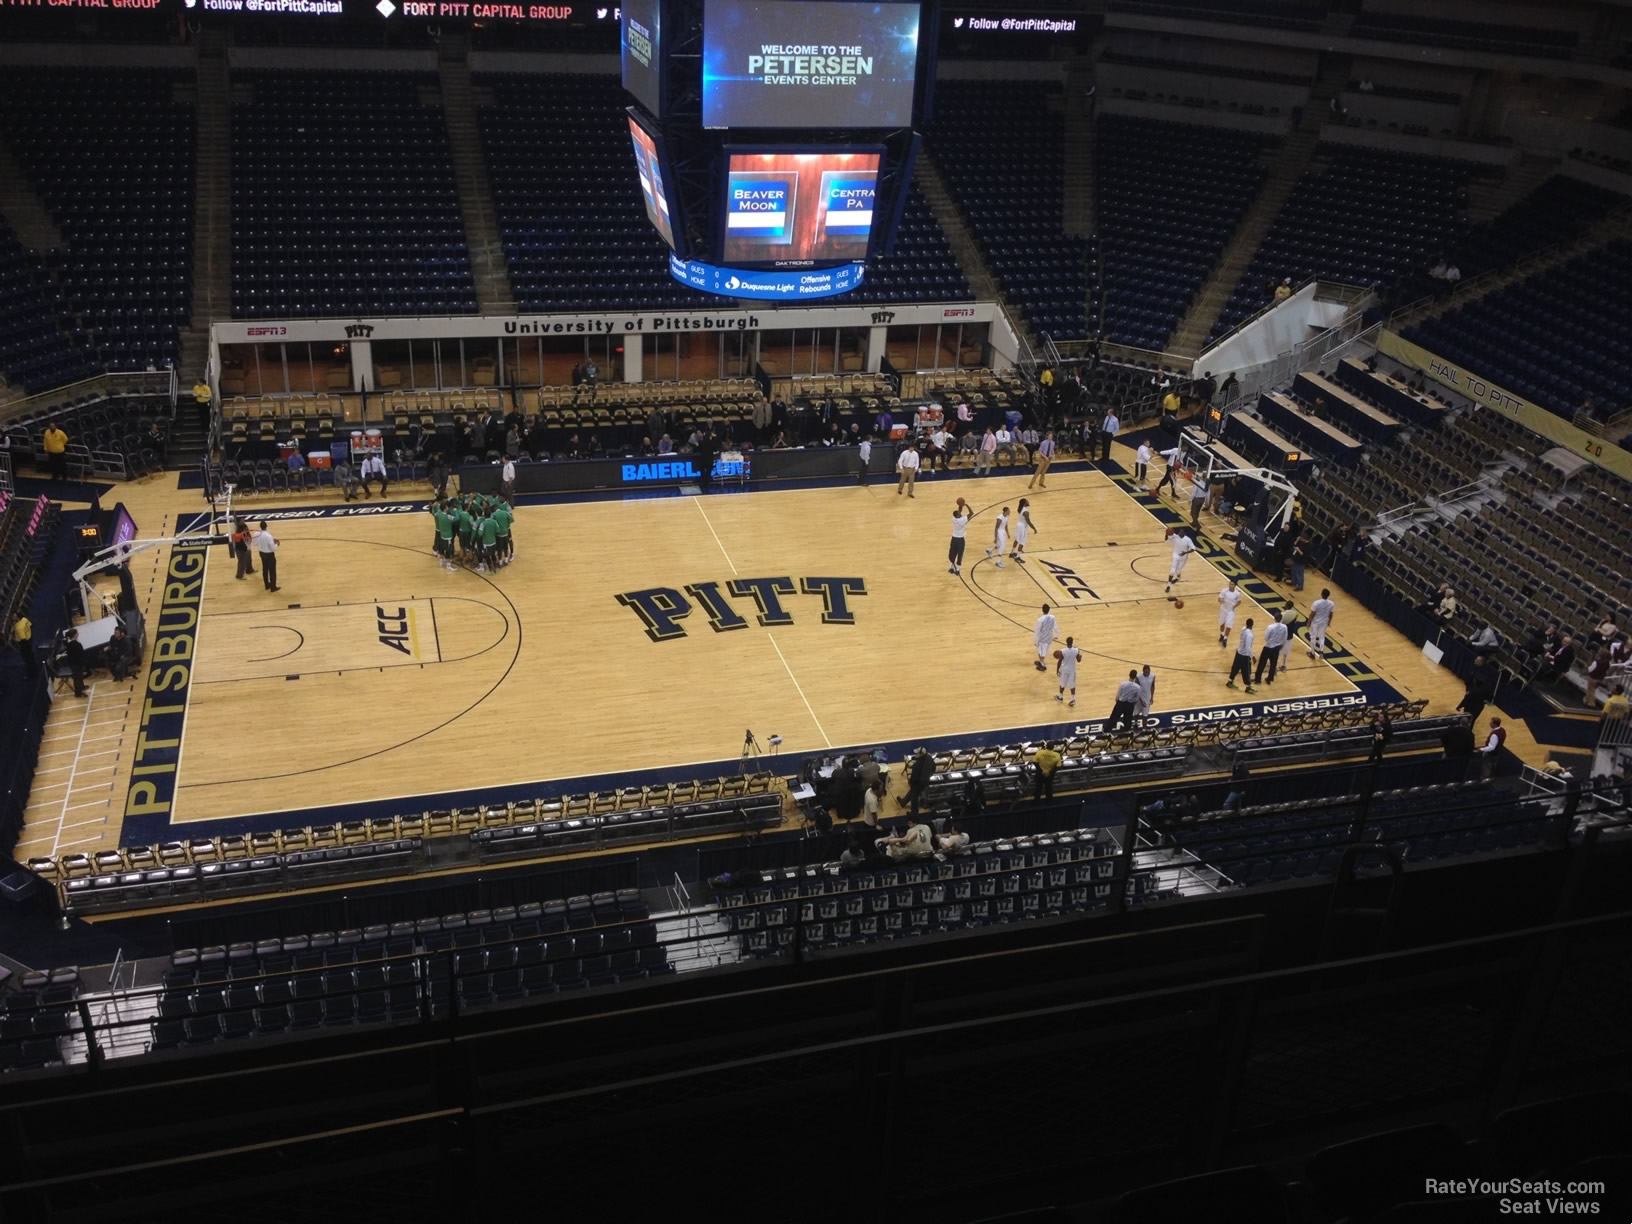 section 209, row f seat view  - petersen events center